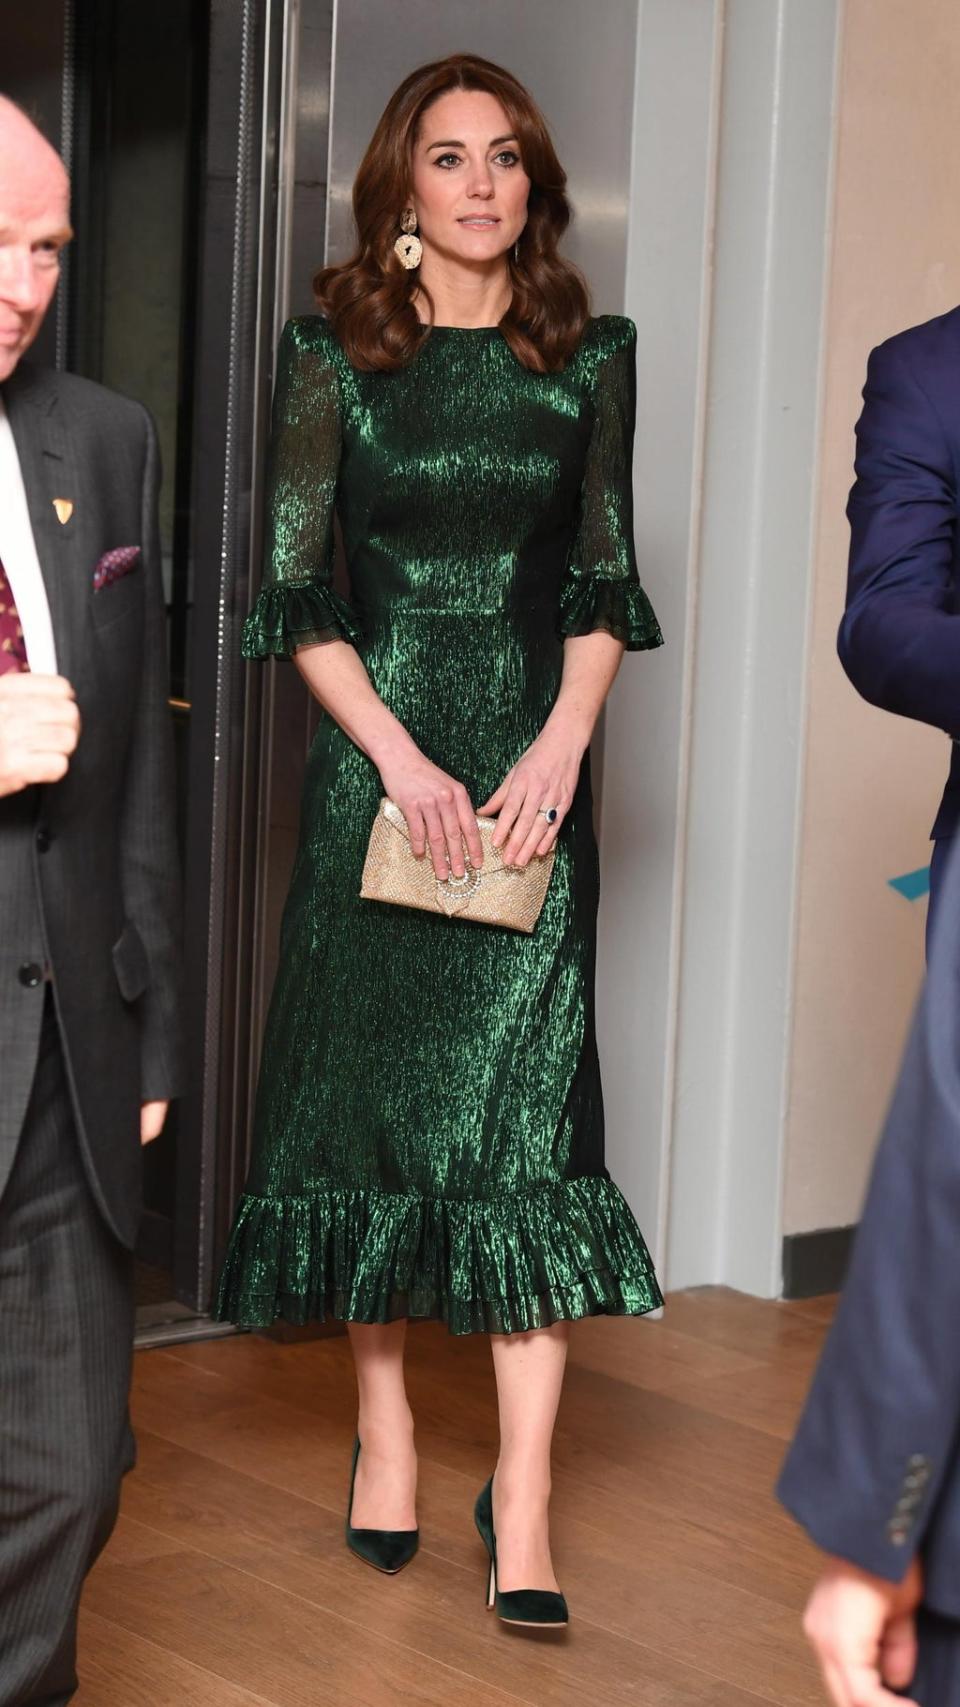 Catherine, Duchess of Cambridge wears The Vampire’s Wife ‘Falconetti’ dress in 2020 (Getty Images)